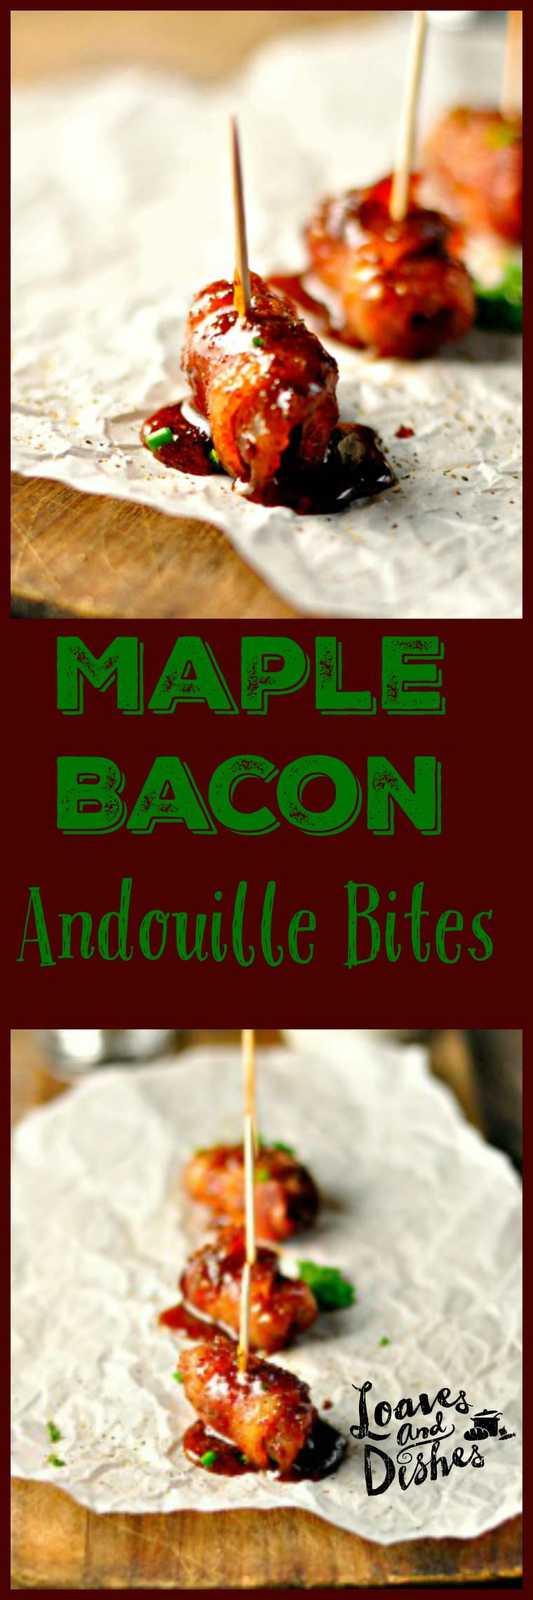 Need a perfect dish to take for the holiday's? Maple Bacon Andouille Bites are the TICKET! EASY! www.loavesanddishes.net